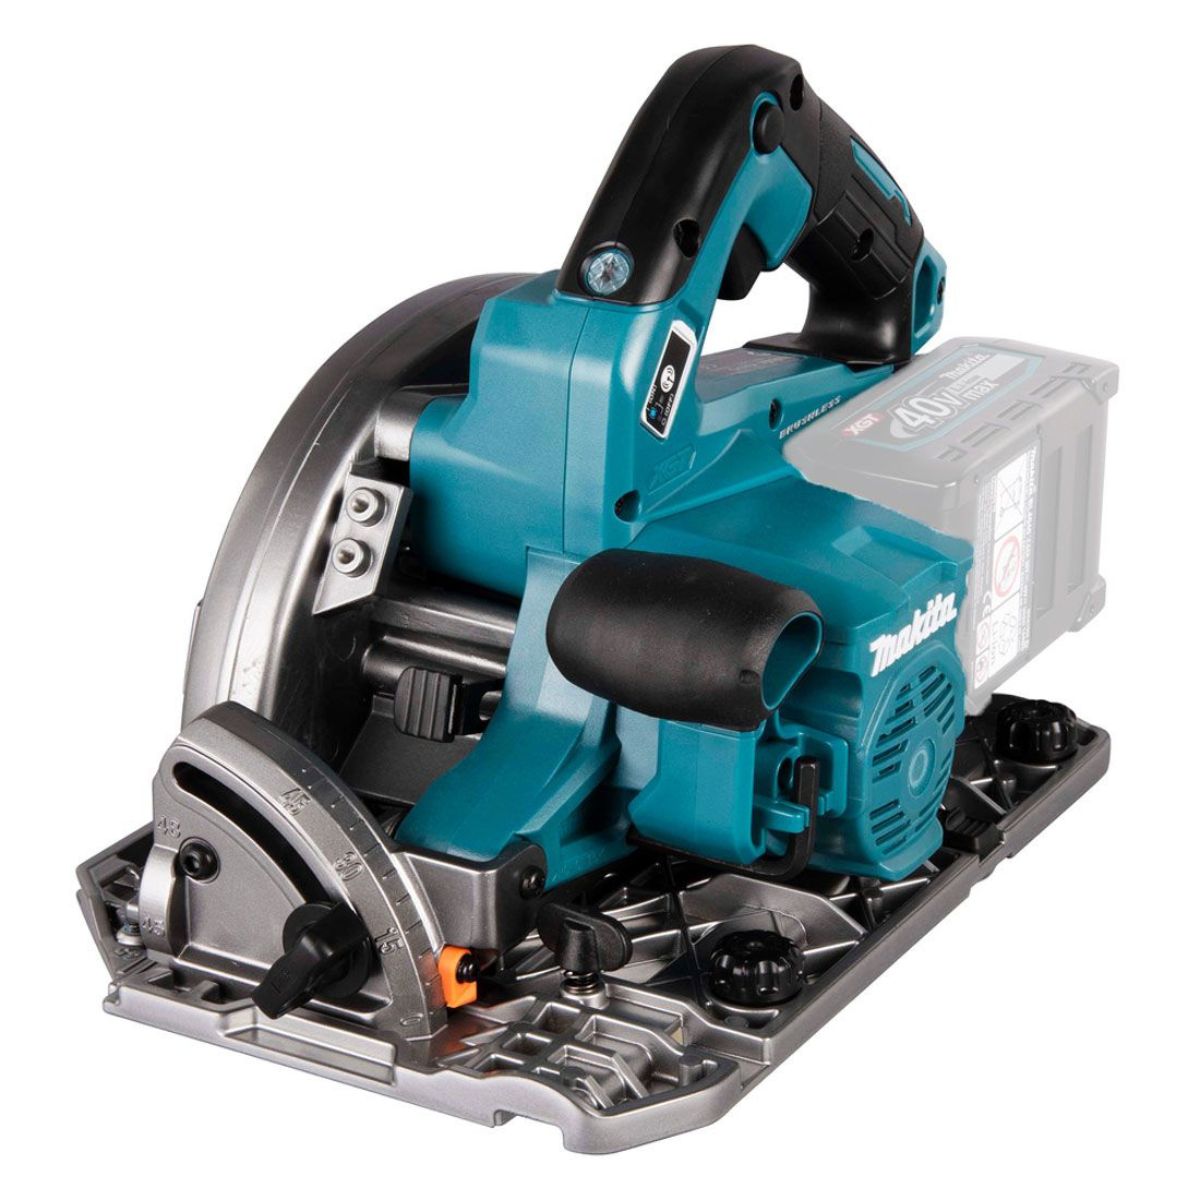 Makita HS004GZ02 40V Max XGT Brushless 190mm Circular Saw Body Only with Case